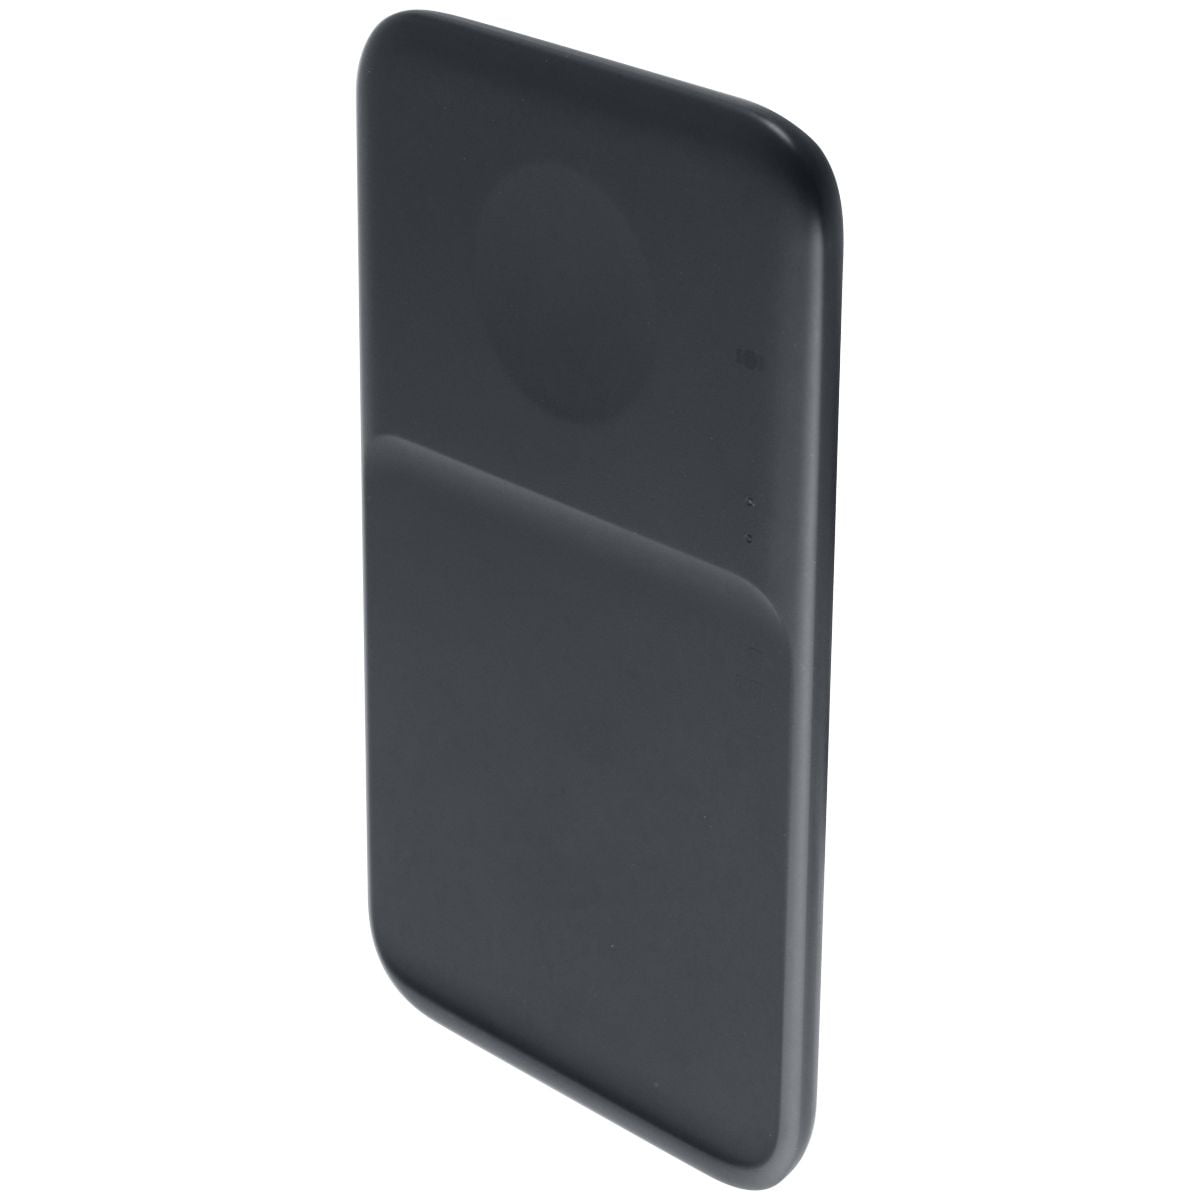 Samsung Wireless Charger Duo 9W Fast Charging Qi Pad for Galaxy Devices -  Black | Walmart Canada